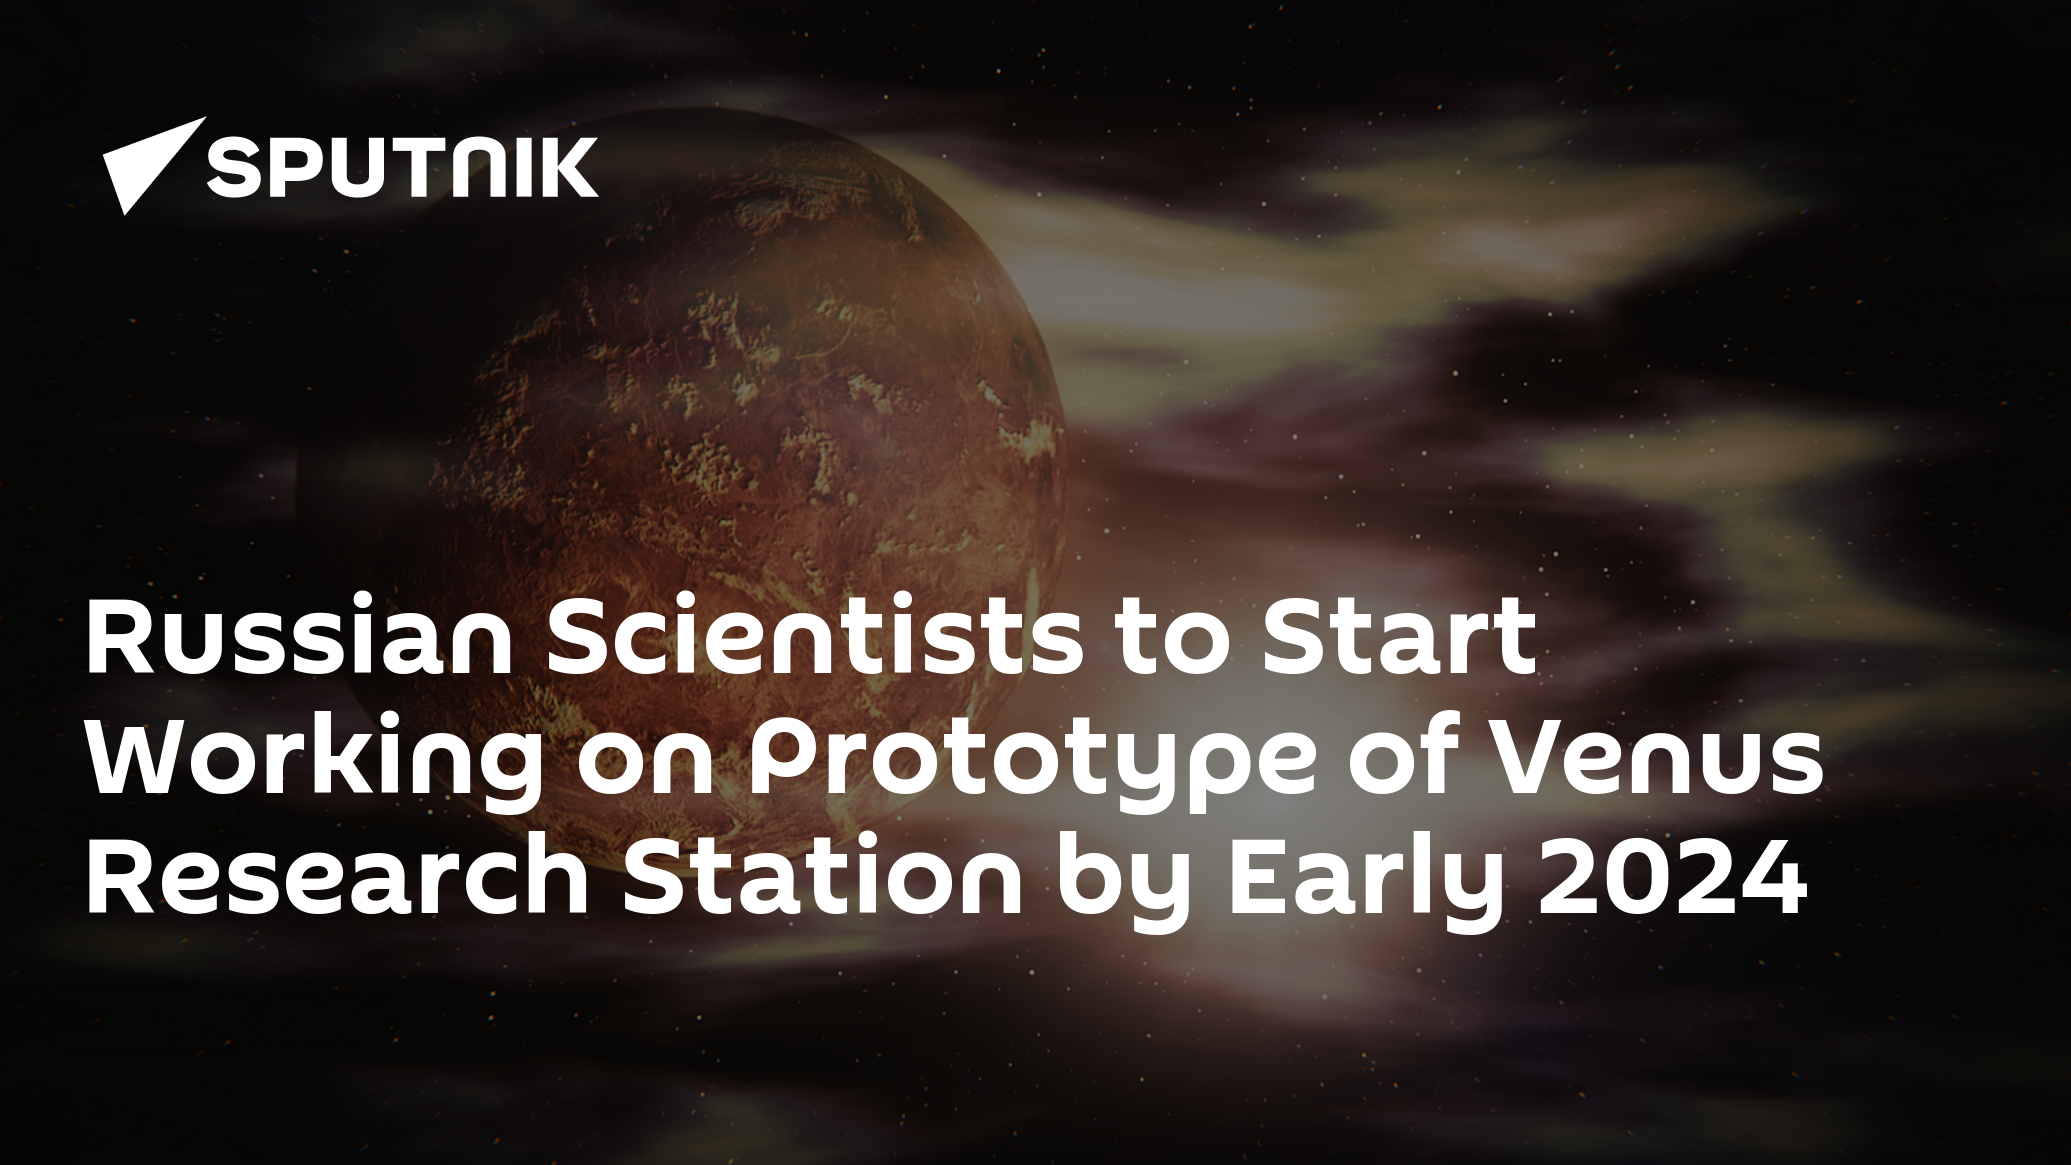 Russian Scientists to Start Working on Prototype of Venus Research Station by Early 2024